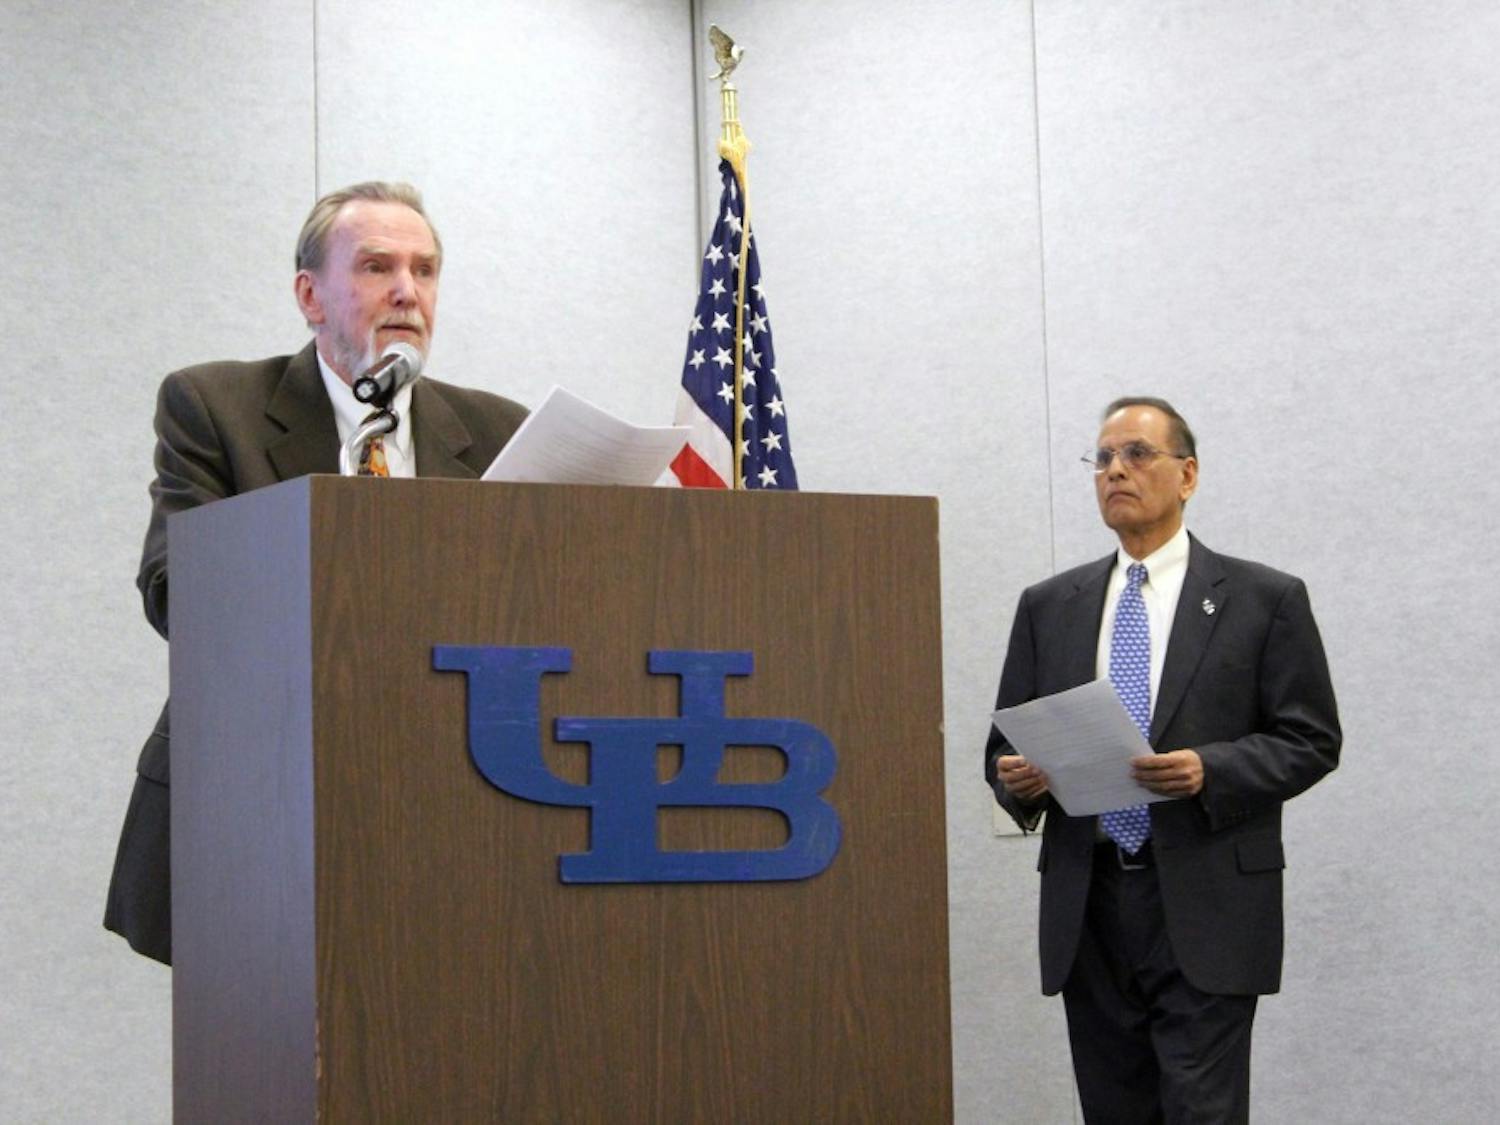 Robert Shibley speaks from podium with President Tripathi beside him.&nbsp;The UB Faculty Senate voted against a resolution Tuesday afternoon&nbsp;to censure Dean of the School of Architecture and Planning Robert Shibley, with 43 opposed, 15 in favor and three abstaining.